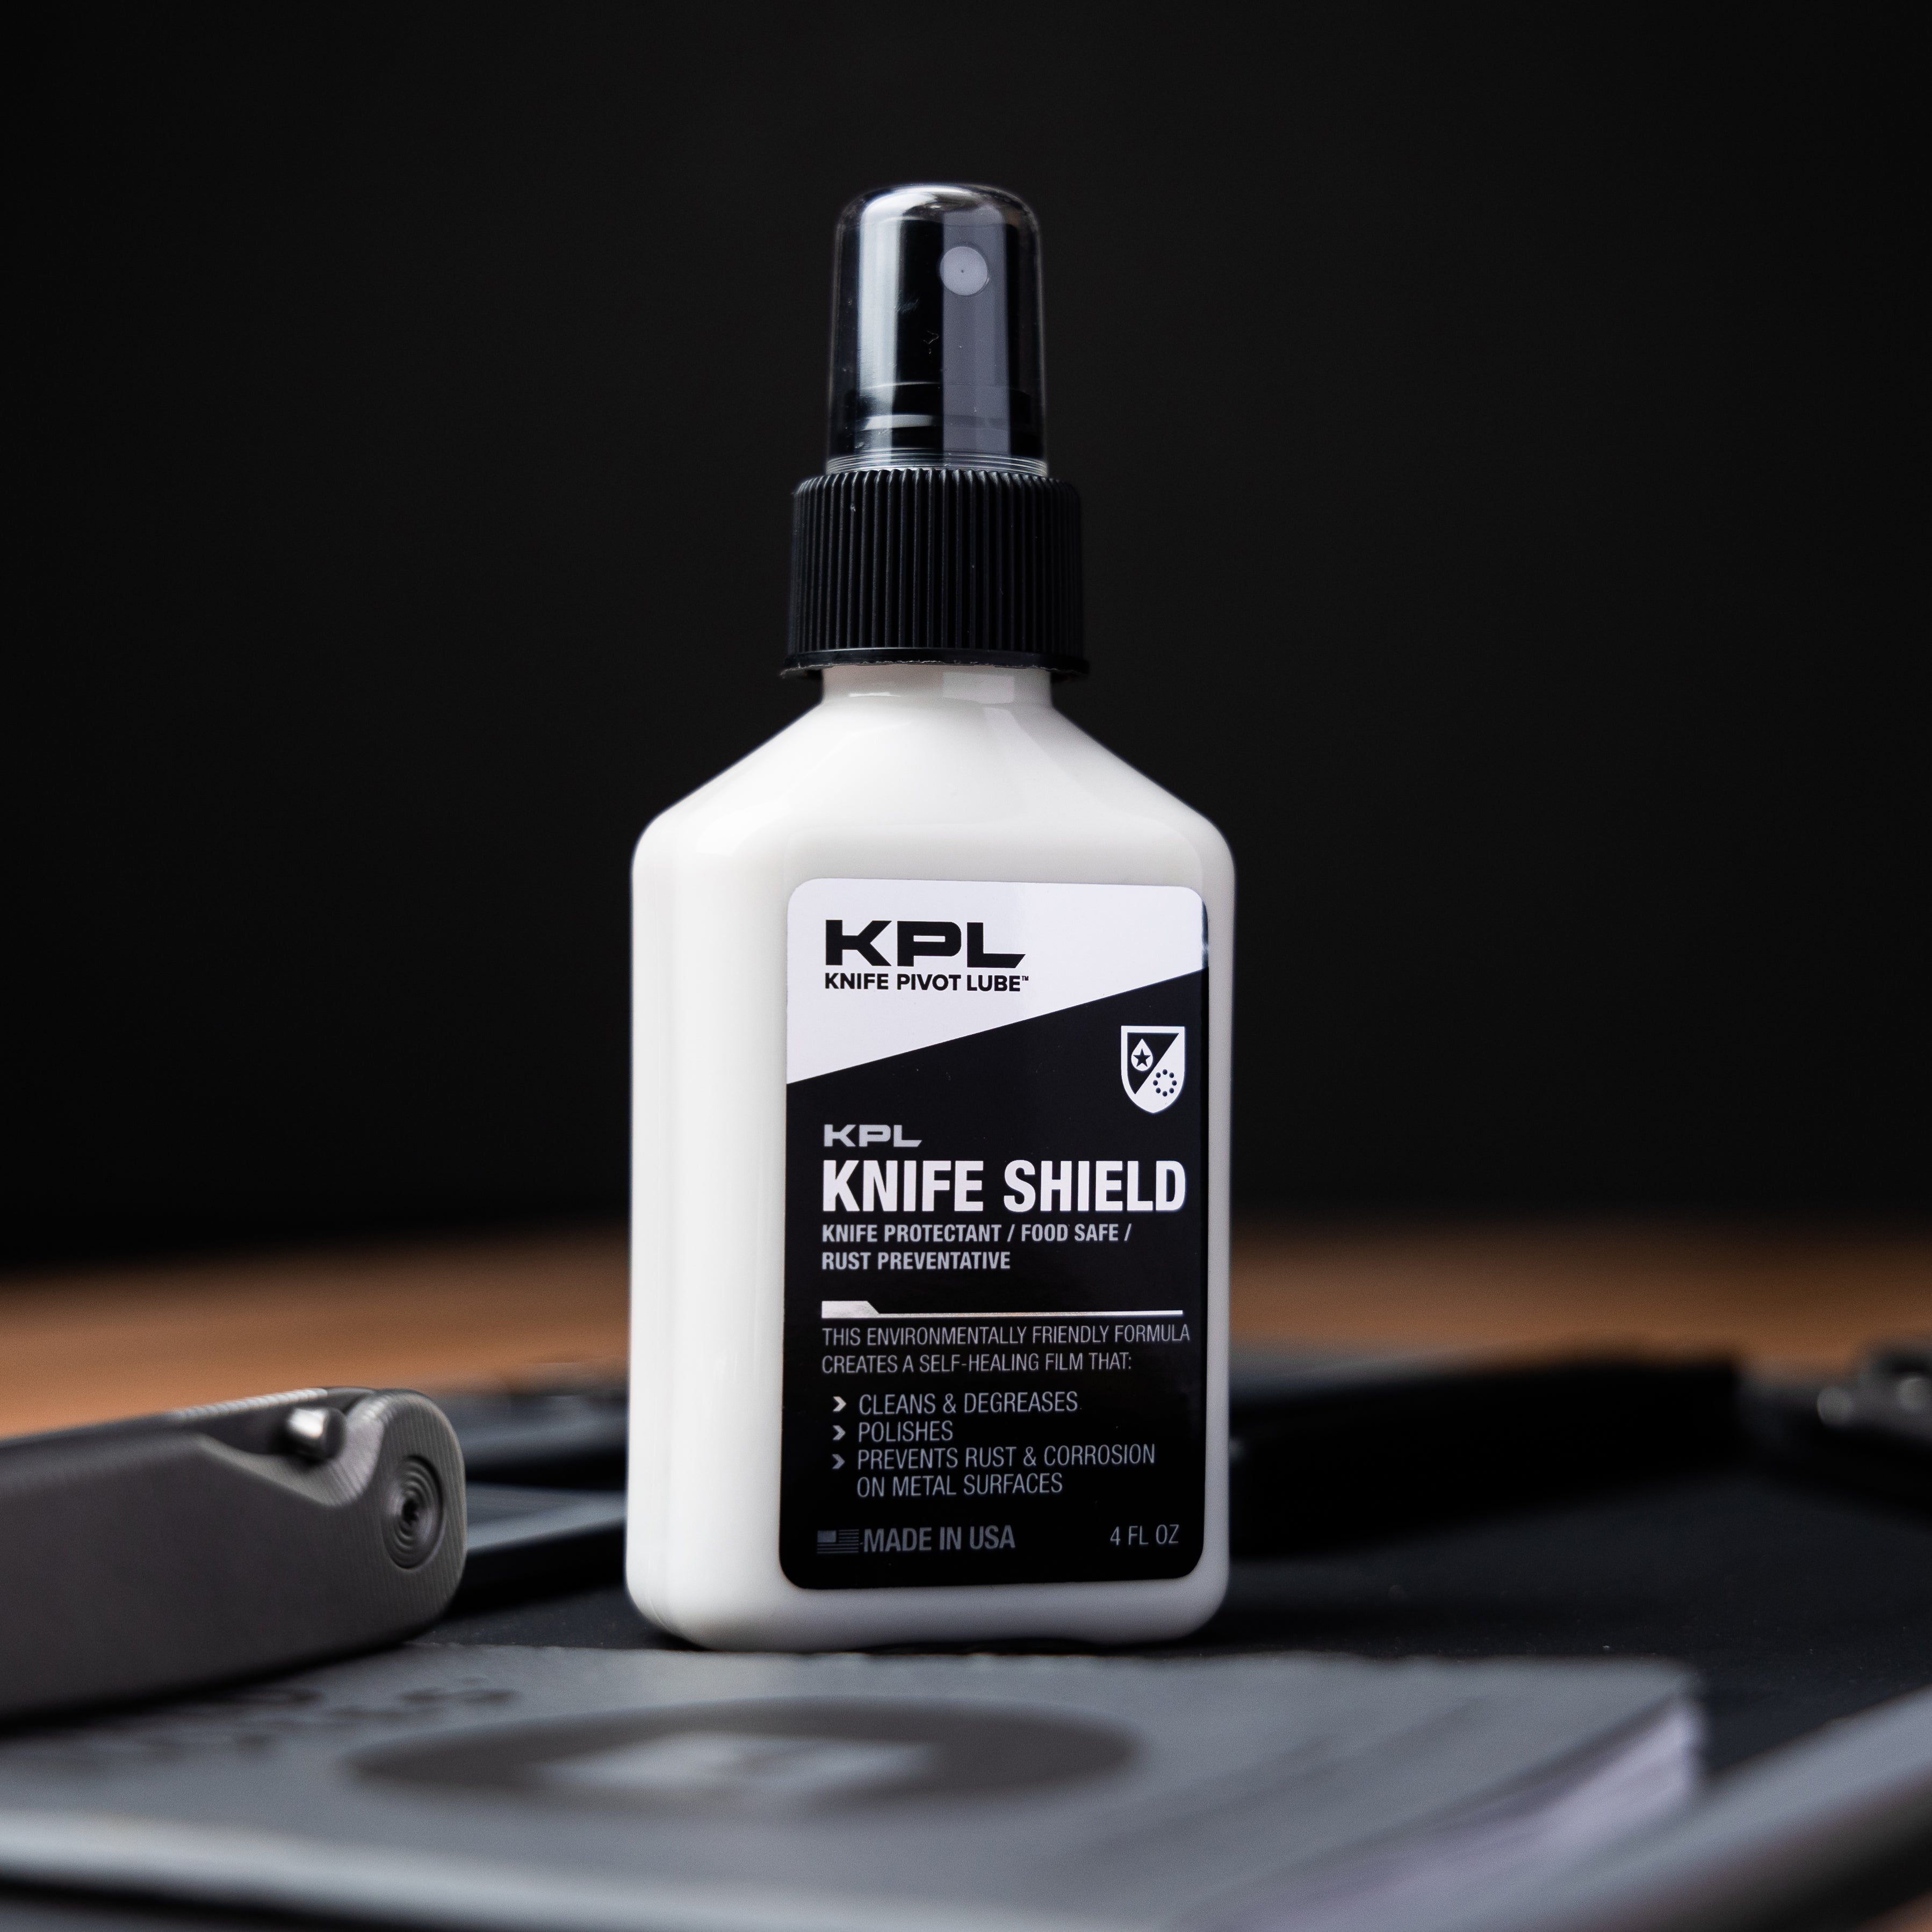  BLADE Premium Knife Oil & Pivot Lube for Steel Folding Knives &  Multi-Tools  Knife Pivot Lube for Both Cleaning & Lubrication of Fine  Steel Blades : Sports & Outdoors